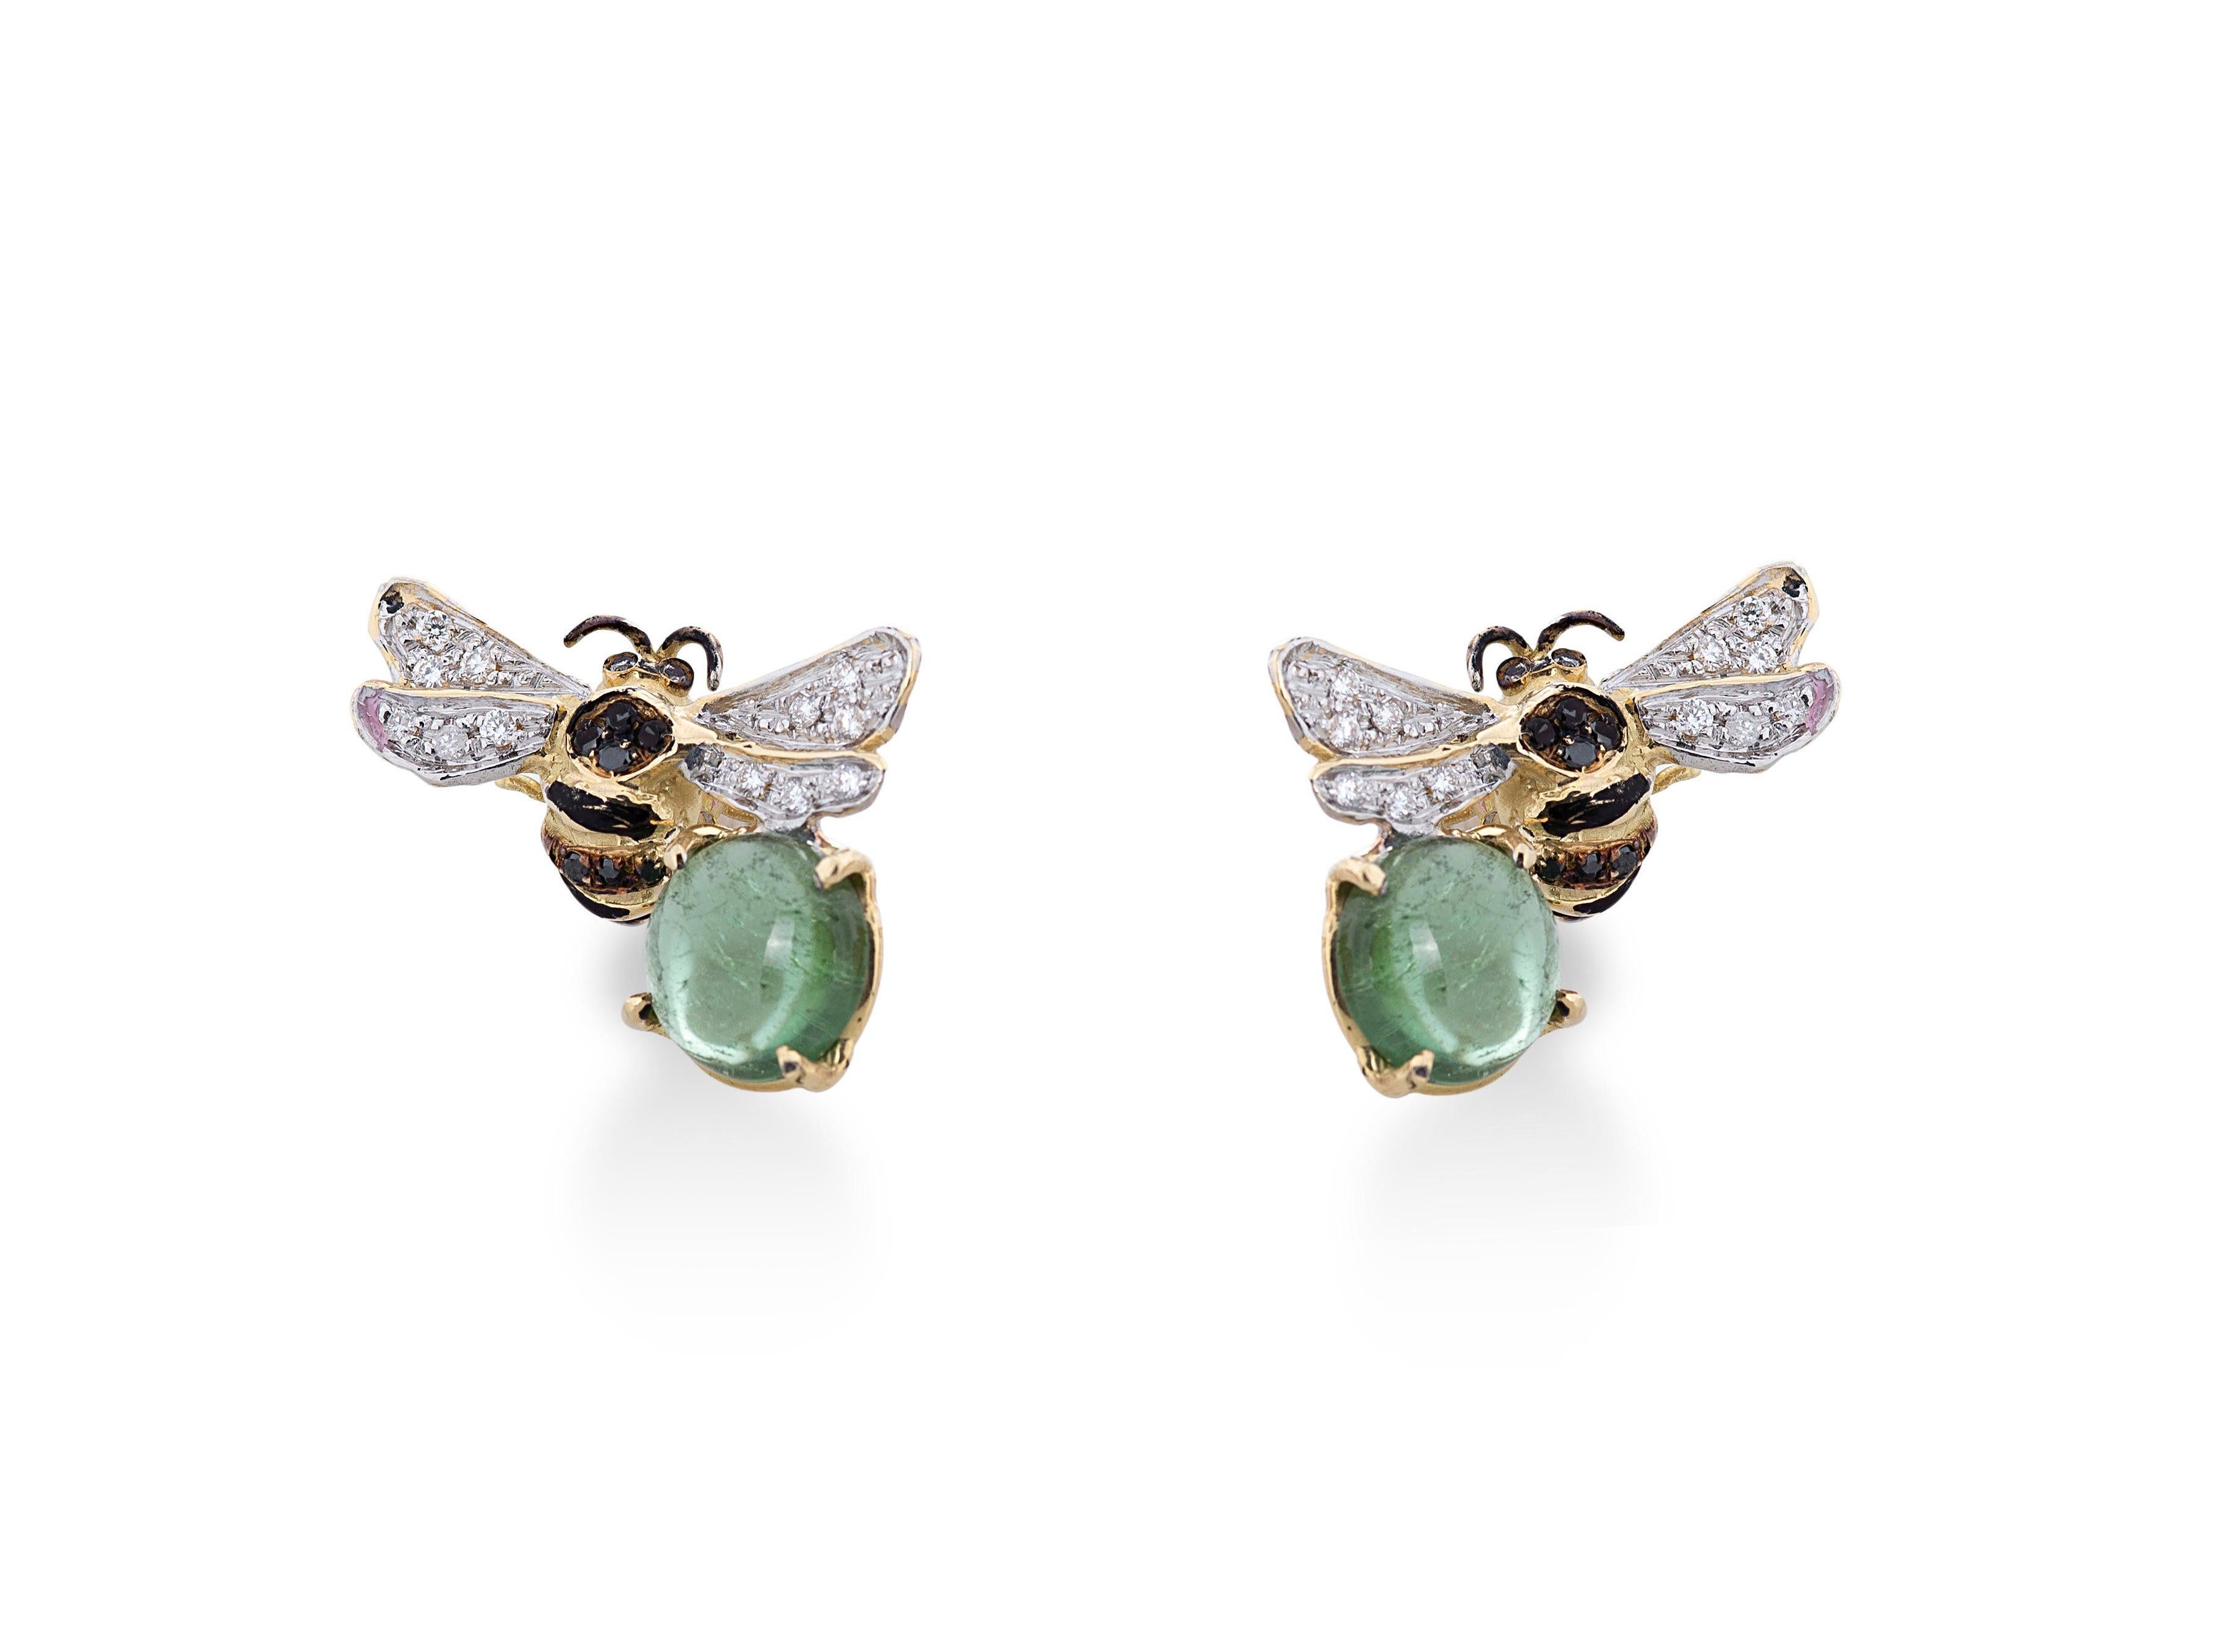 Rossella Ugolini Bees Stud Earrings are a tribute to nature's splendor, handcrafted in Italy with unrivaled artistry.  Handcrafted in 18 Karat Yellow Gold 4 Karats Green Tourmaline 0.16 Karat White Diamond 0.18 Karat Black Diamonds. Unveiling the